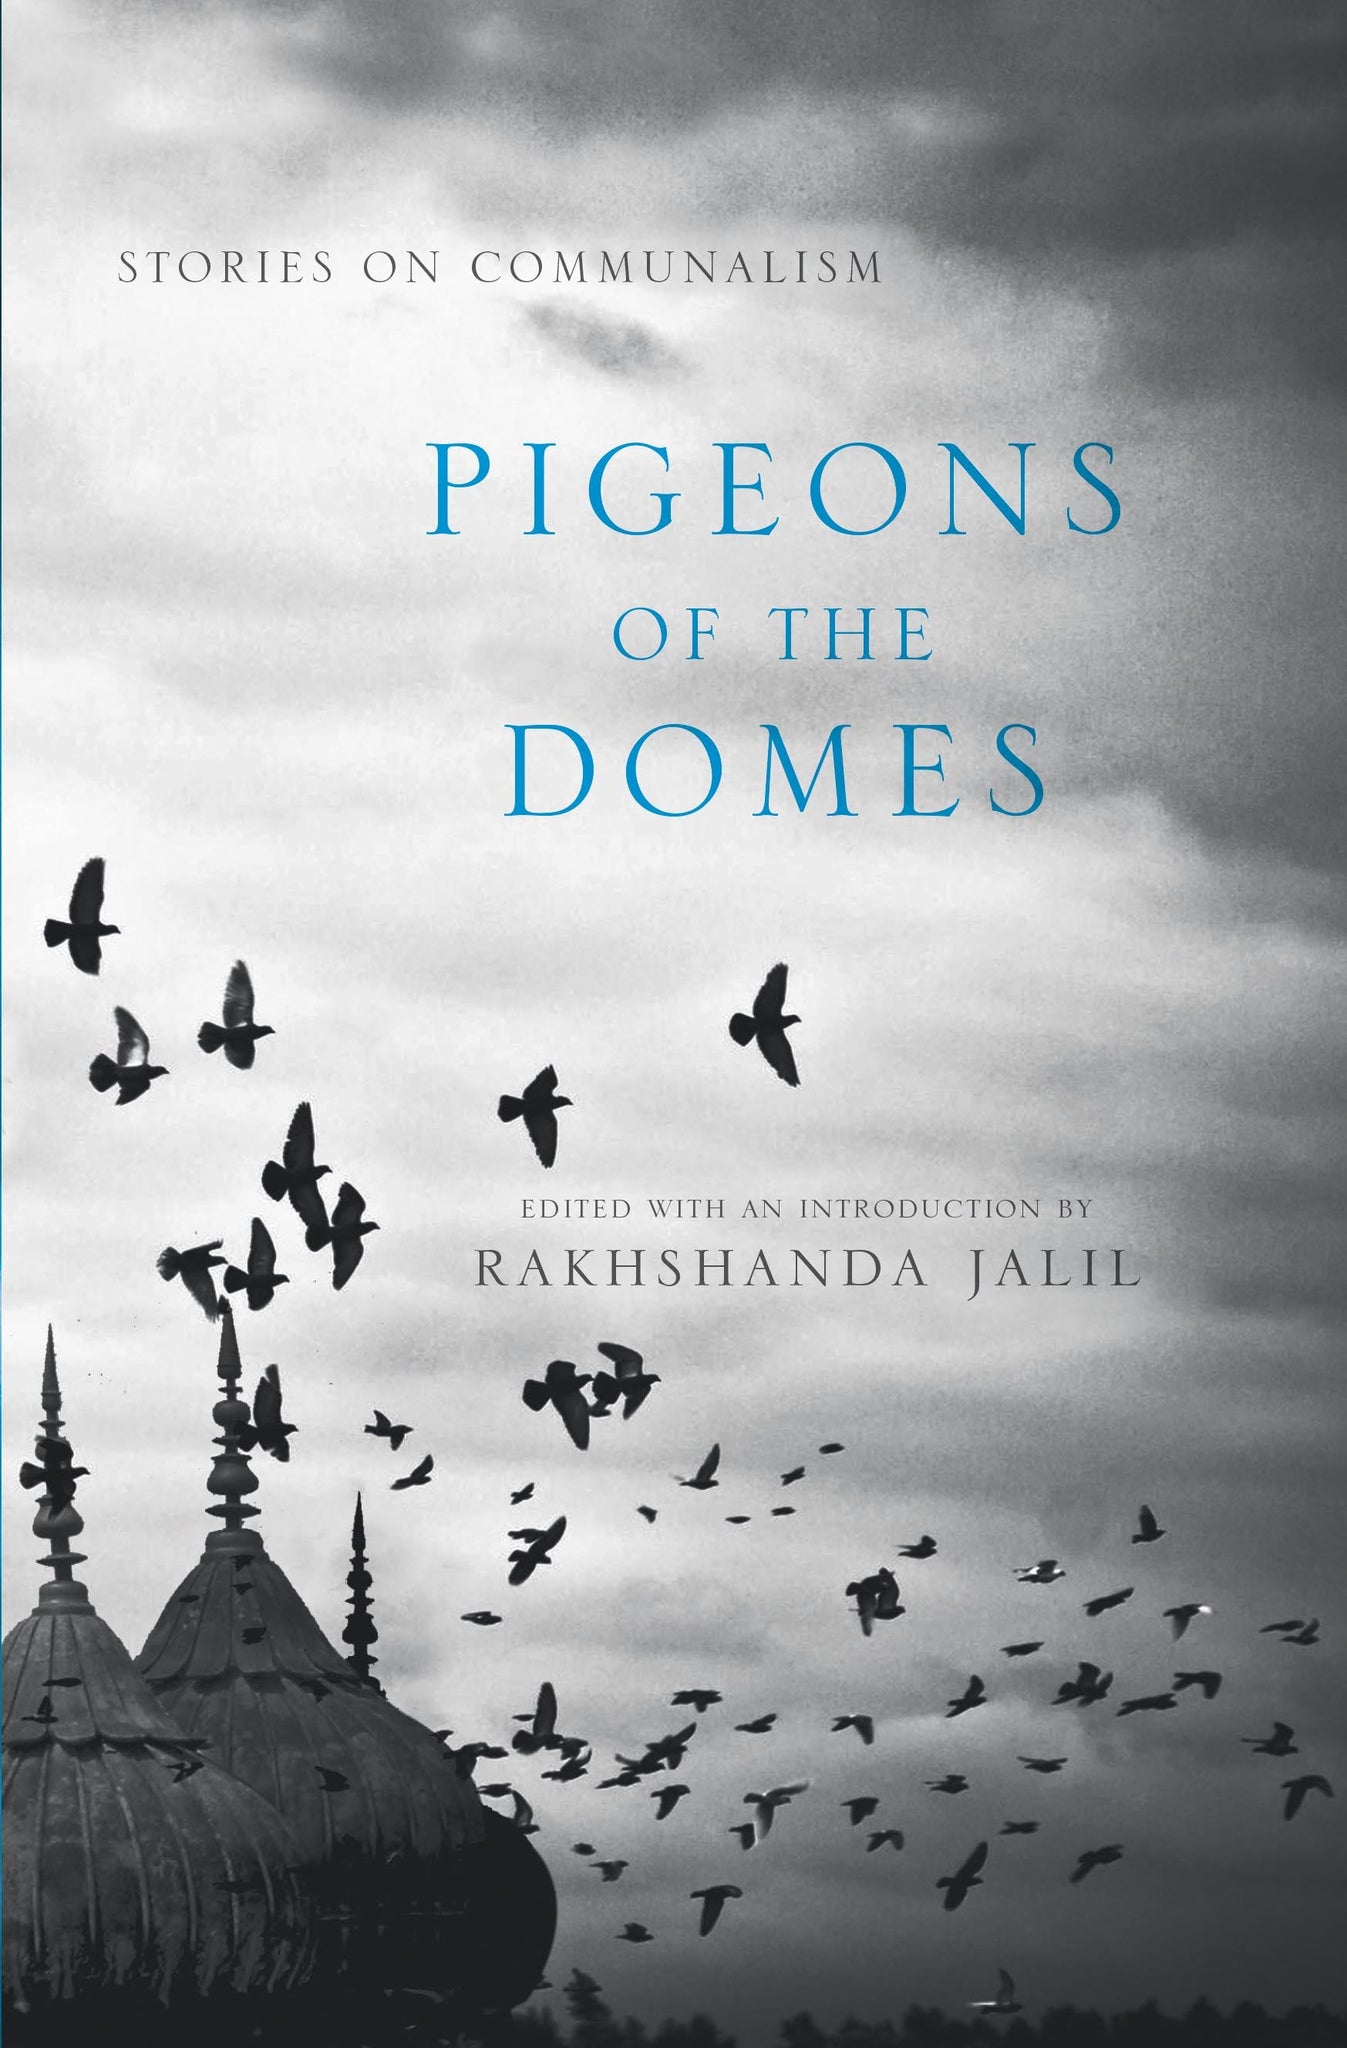 Pigeons of the Domes: Stories on Communalism